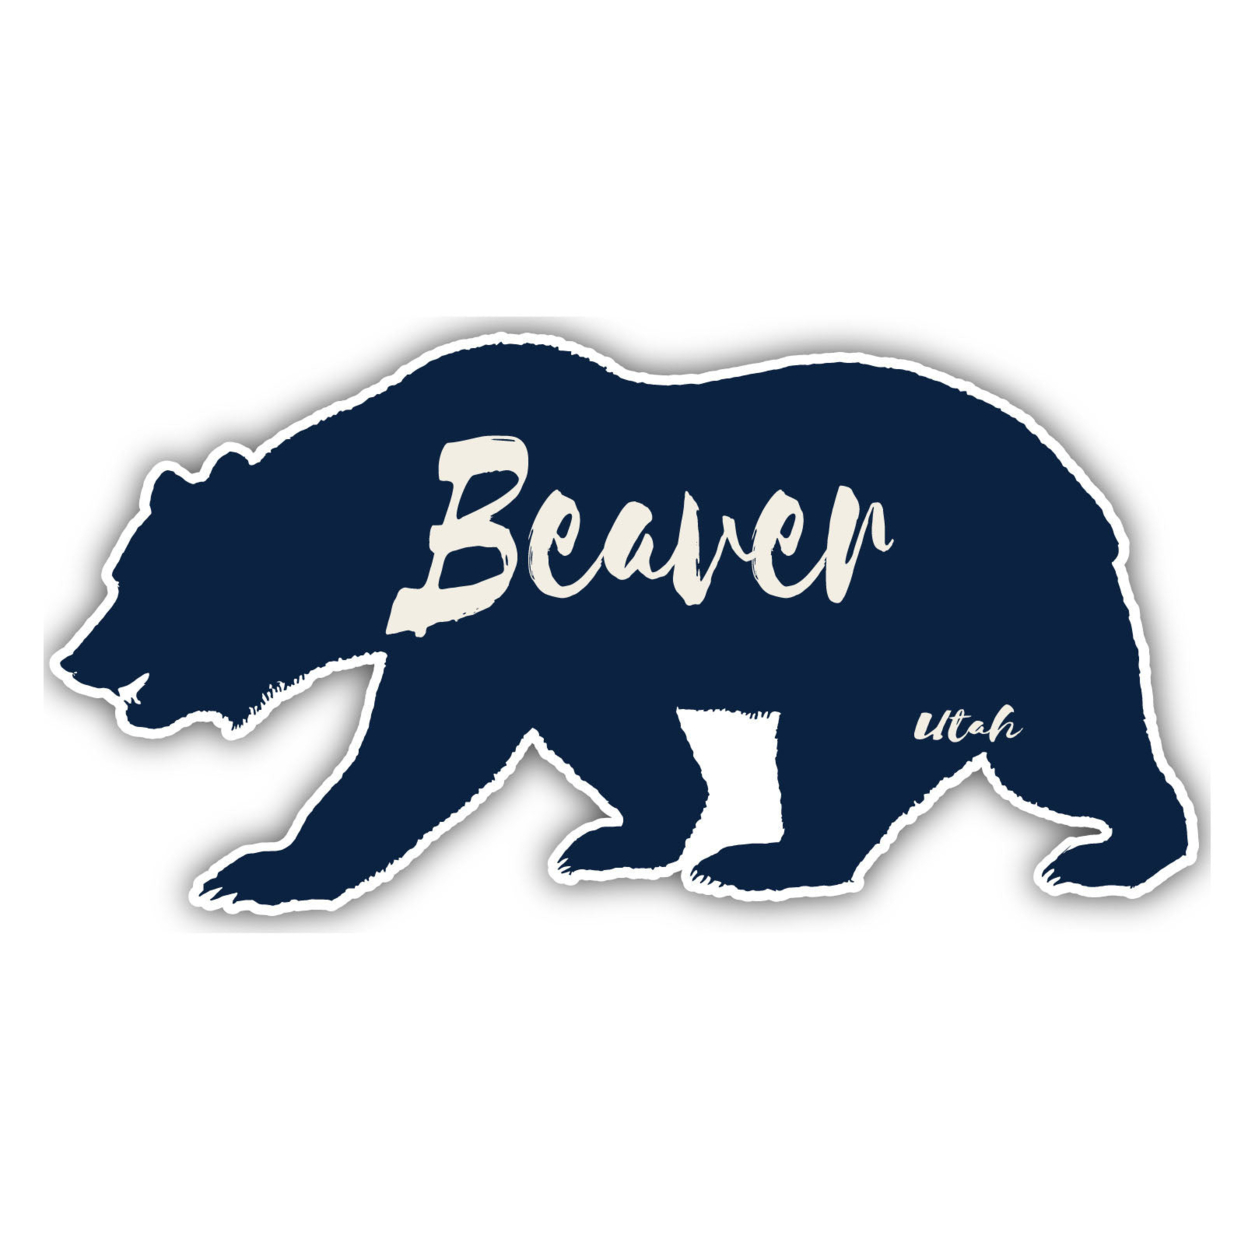 Beaver Utah Souvenir Decorative Stickers (Choose Theme And Size) - 4-Pack, 12-Inch, Tent